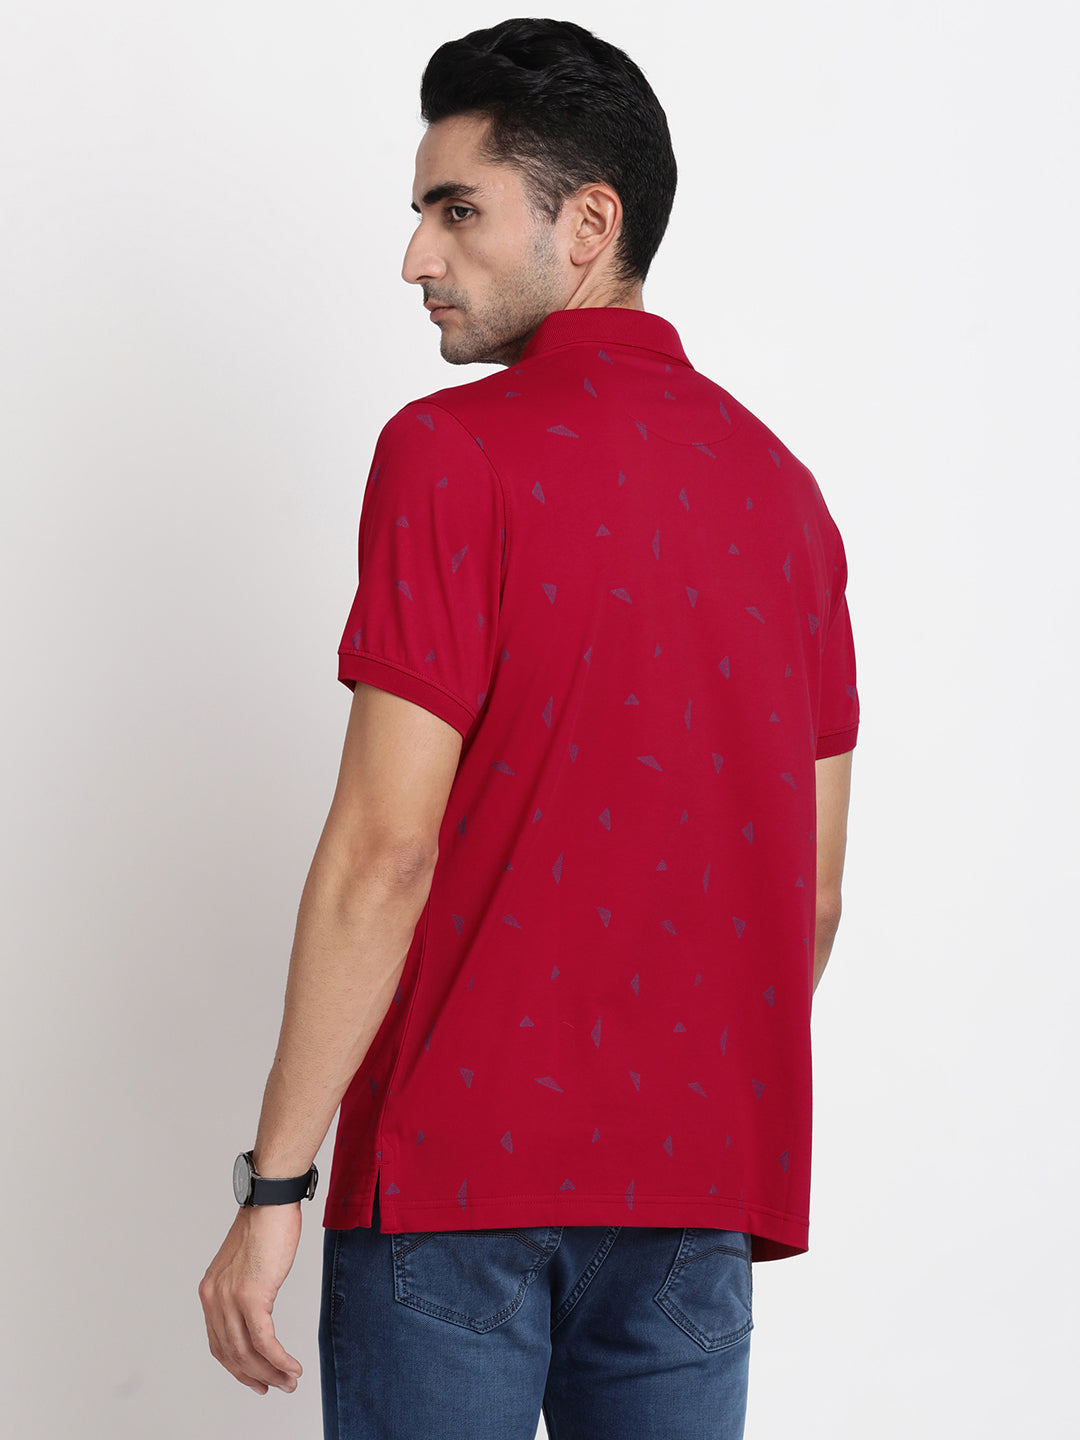 Cotton Stretch Red Printed Polo Neck Half Sleeve Casual T-Shirt